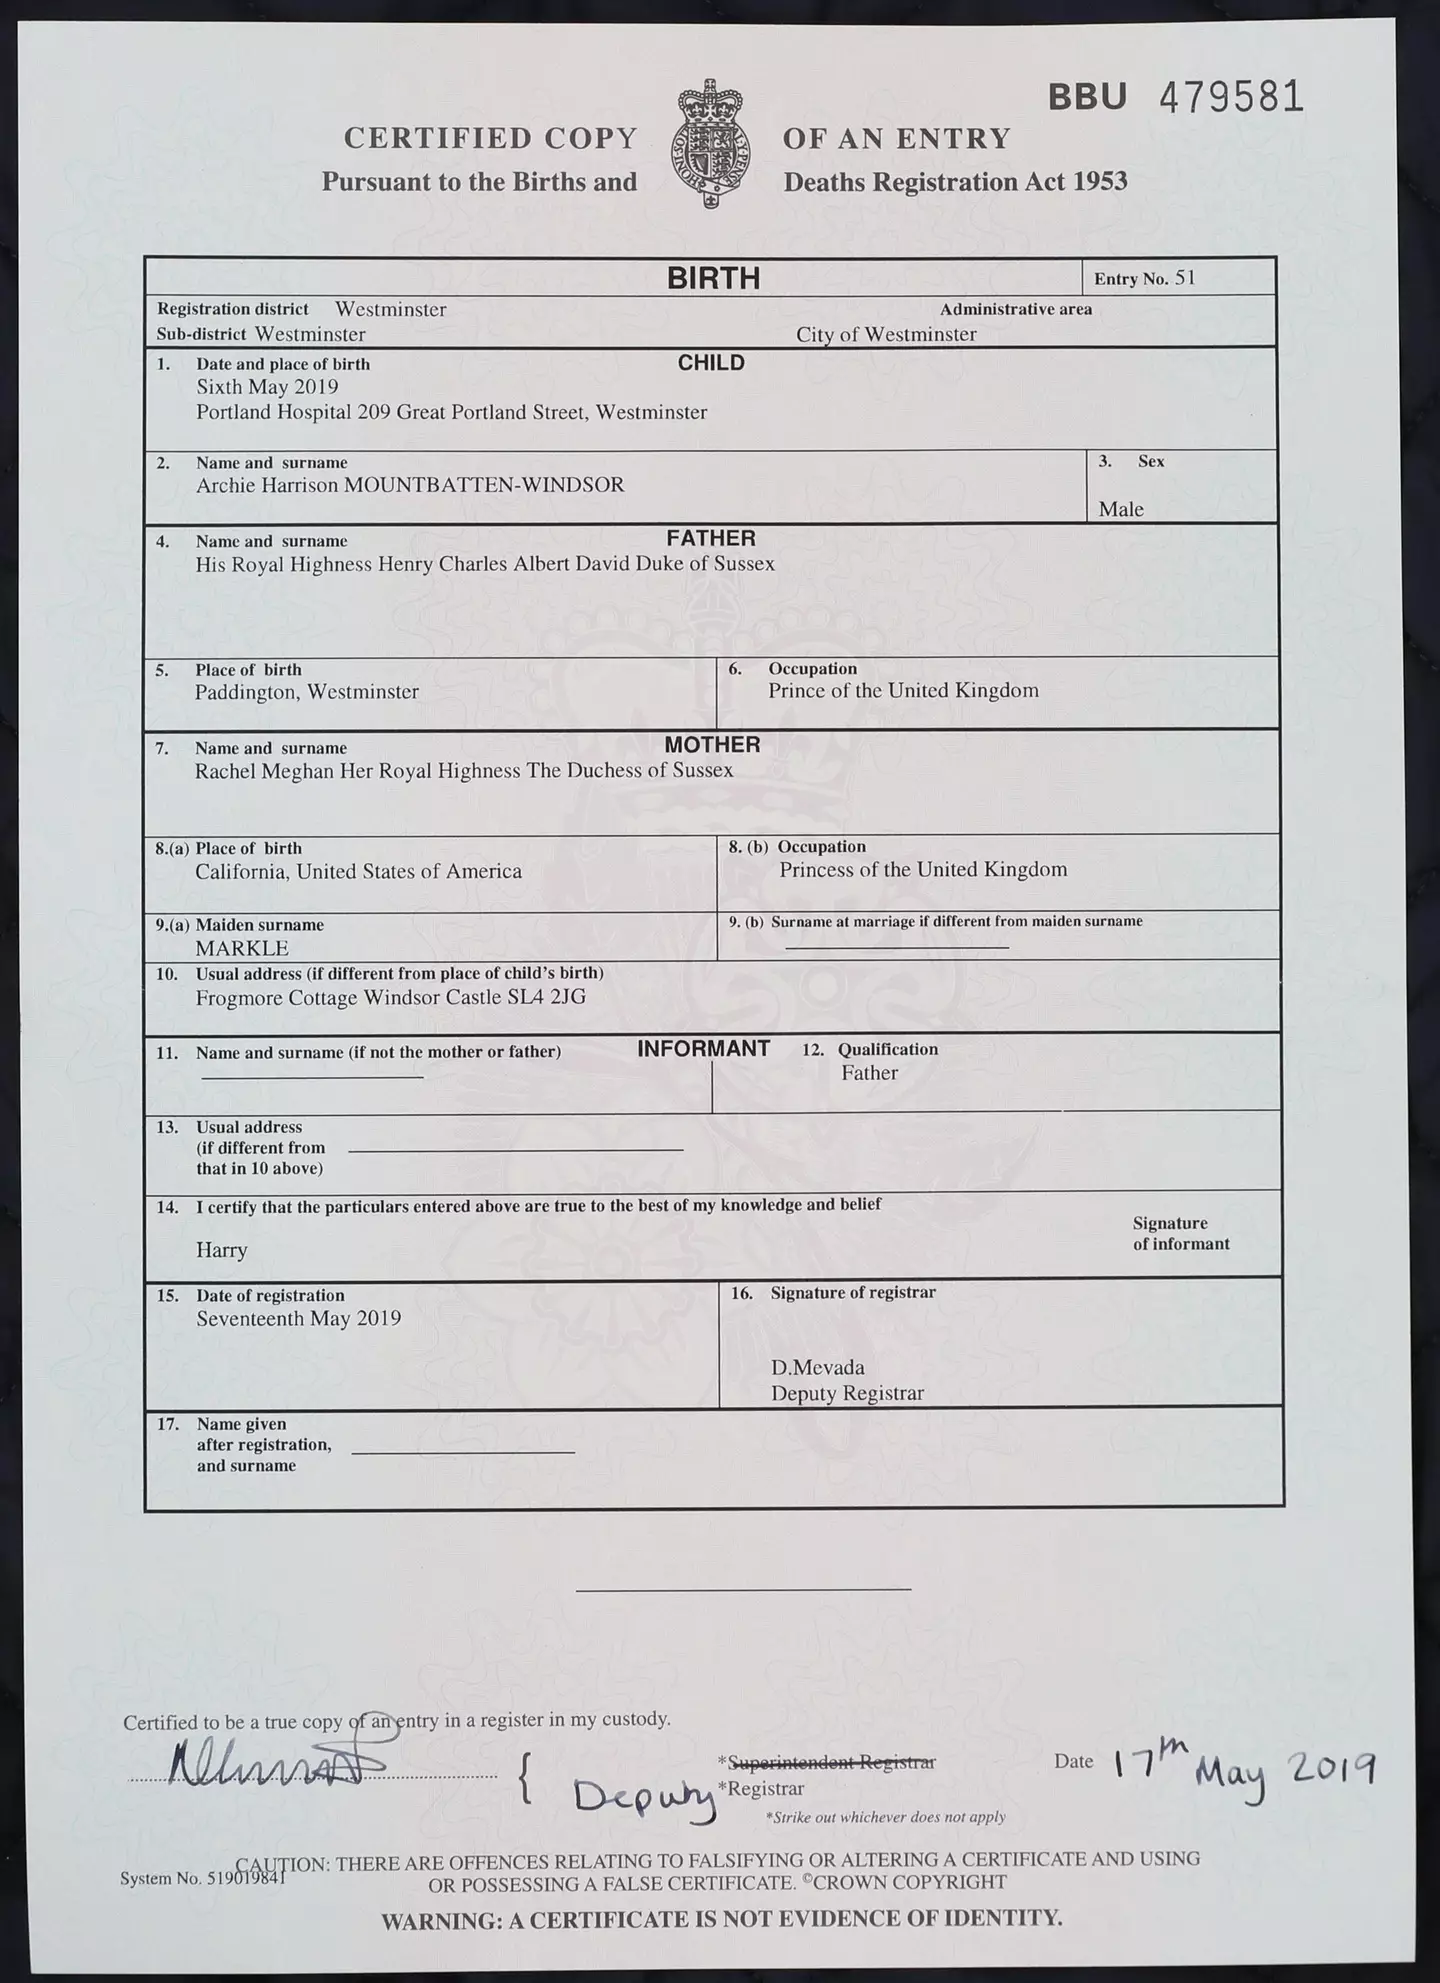 Archie's birth certificate was released in May 2019 (